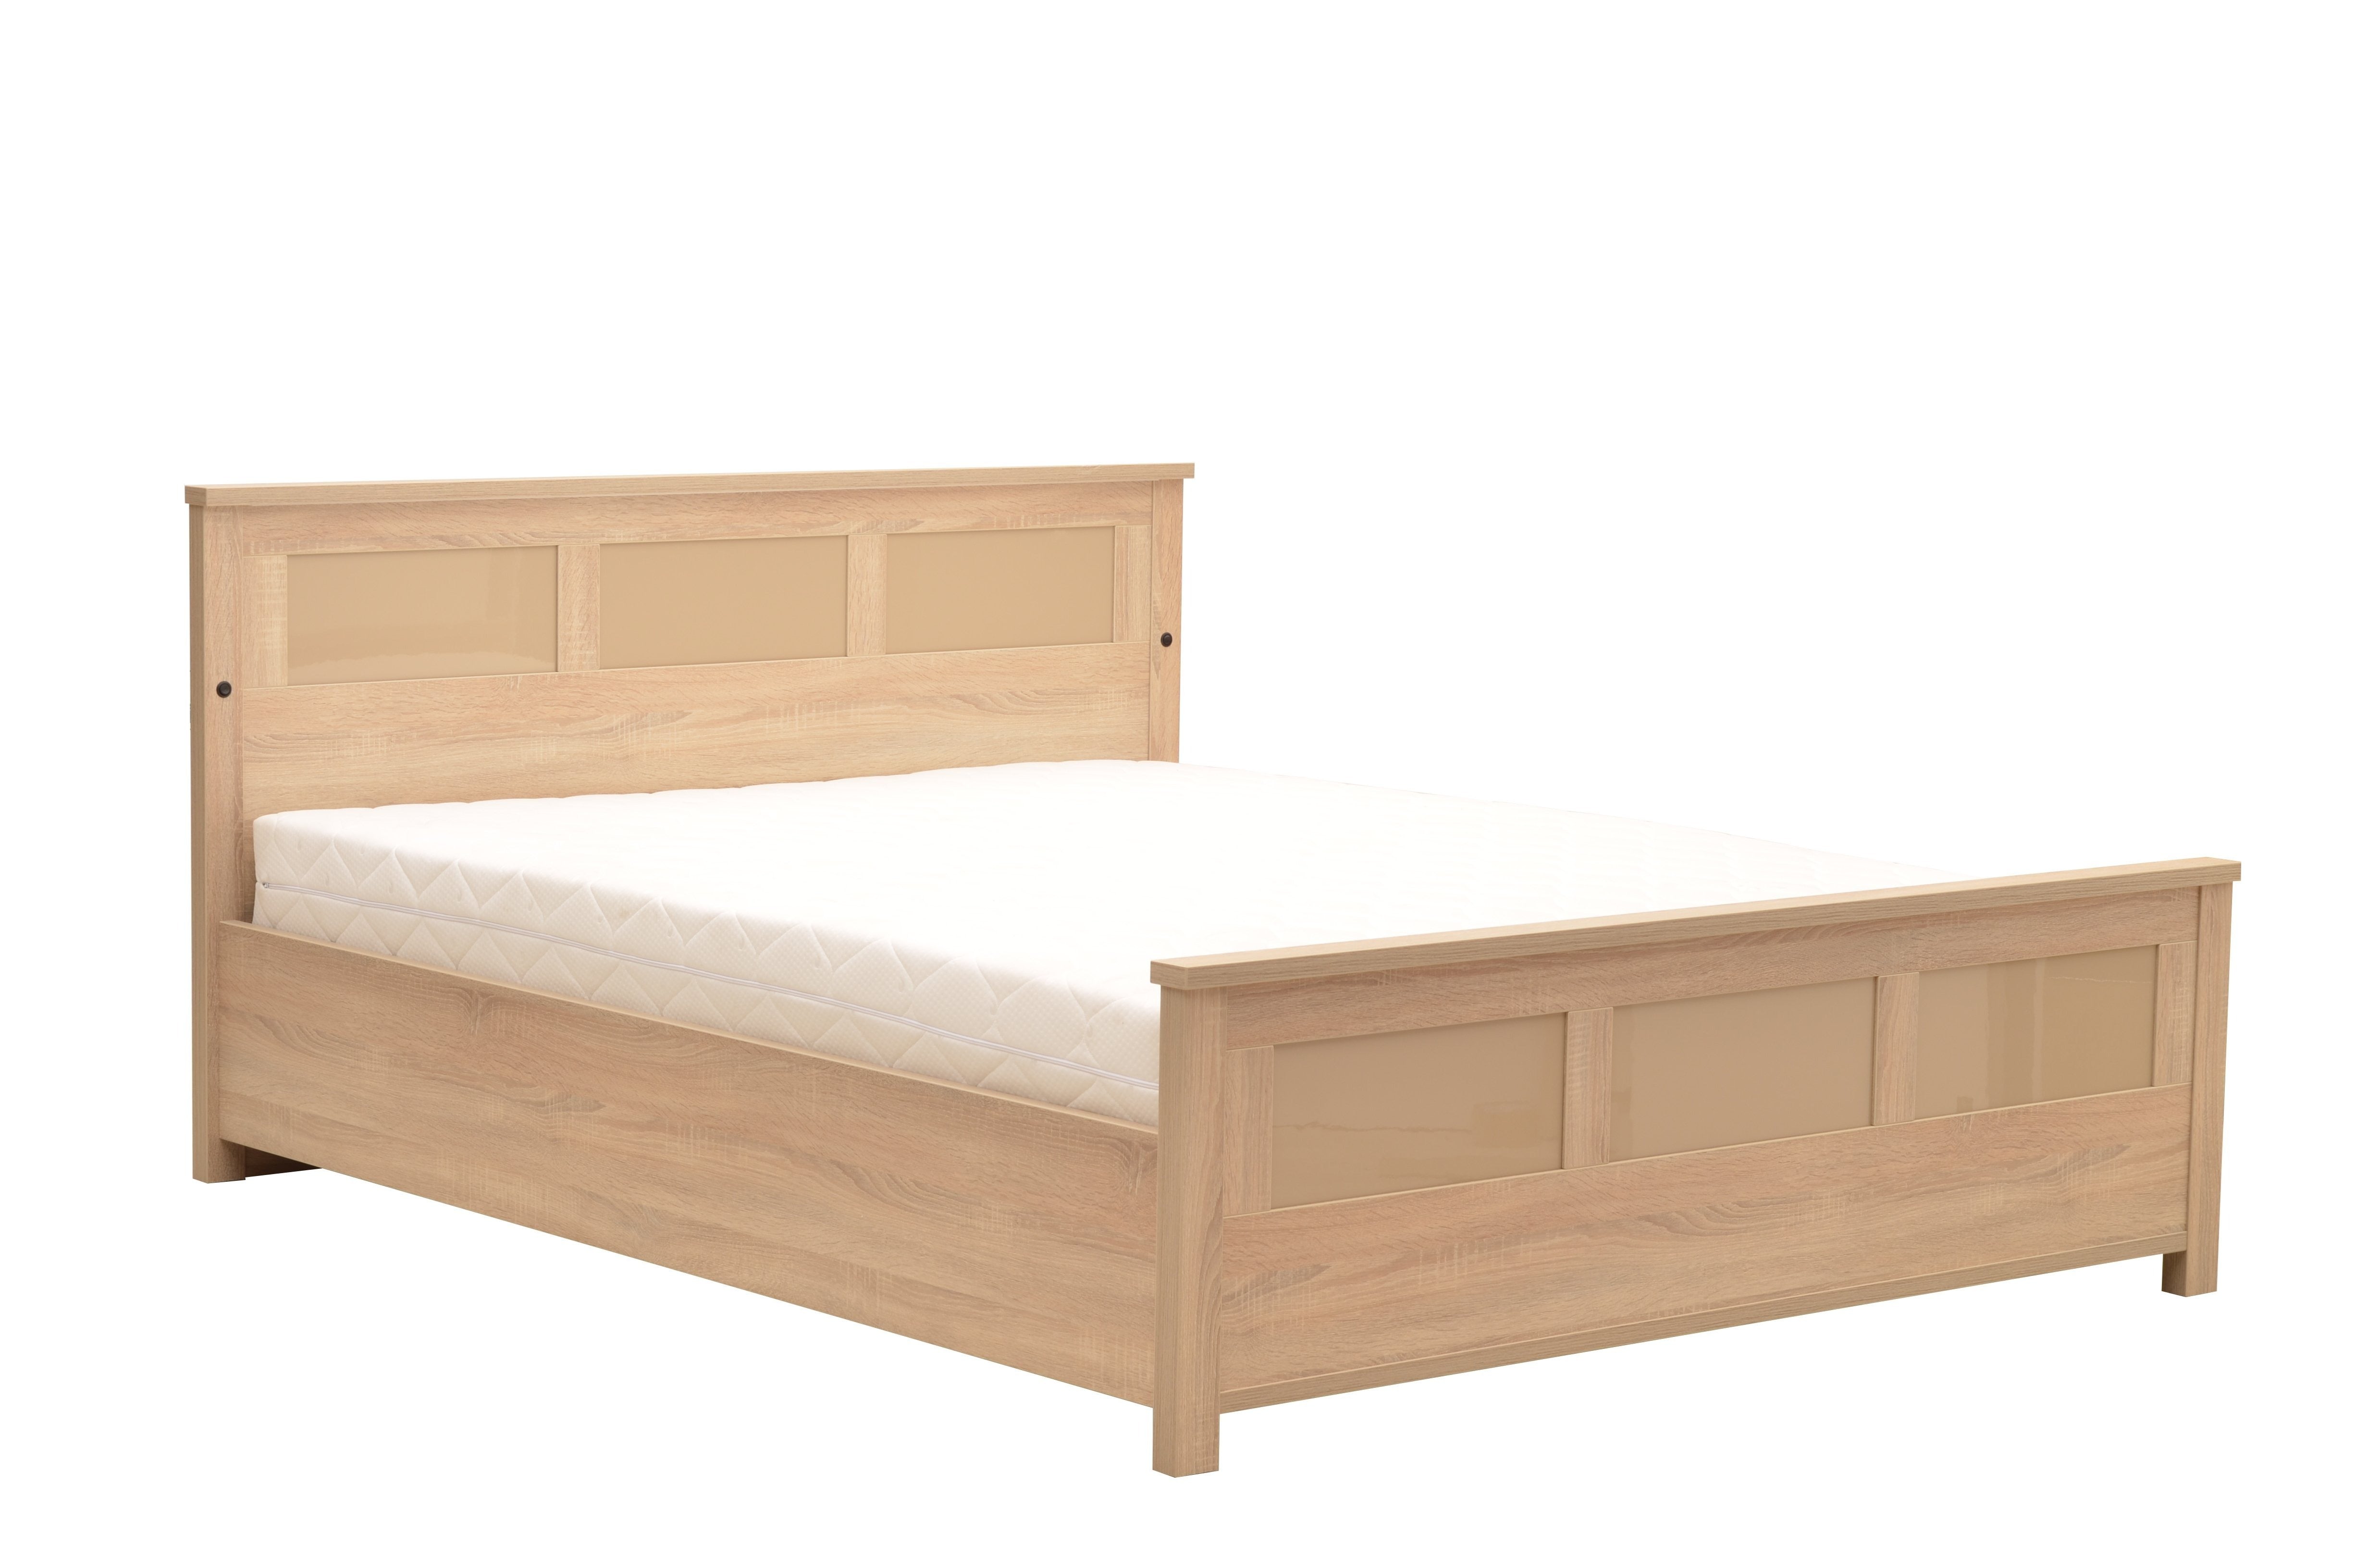 View Cremona Bed with LED in 3 Sizes 140cm Bed information